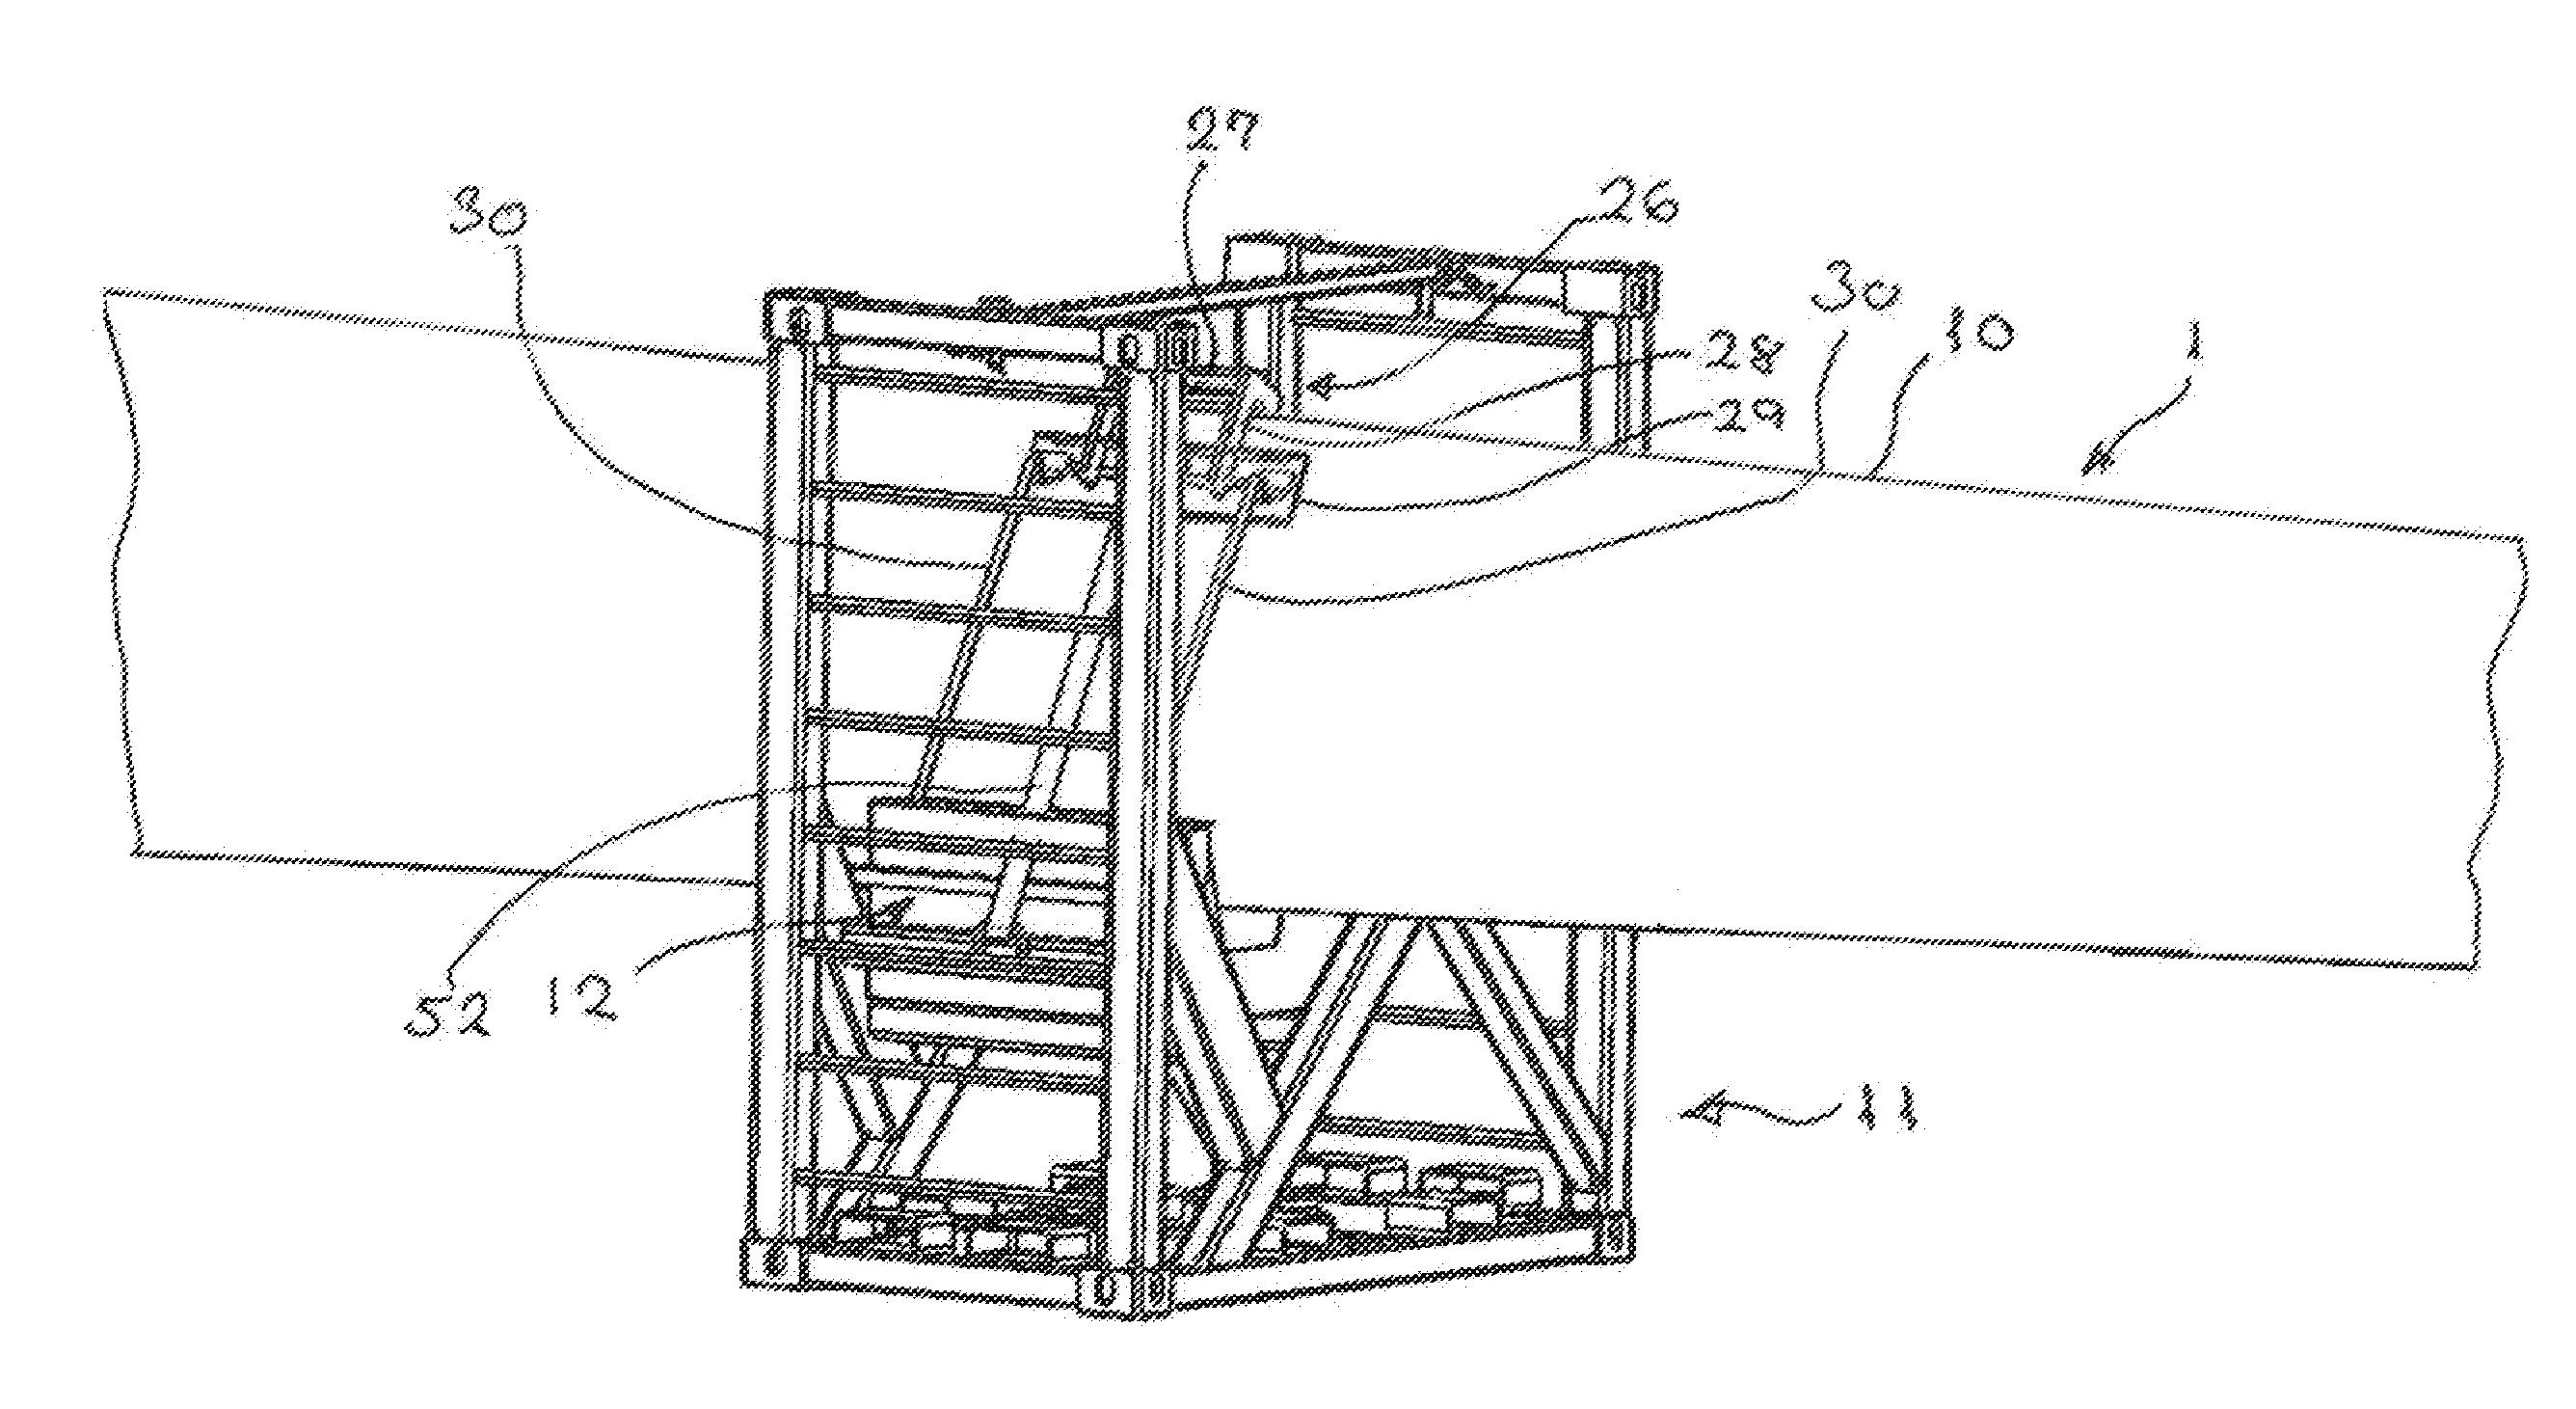 Transportation and storage system for wind turbine blades